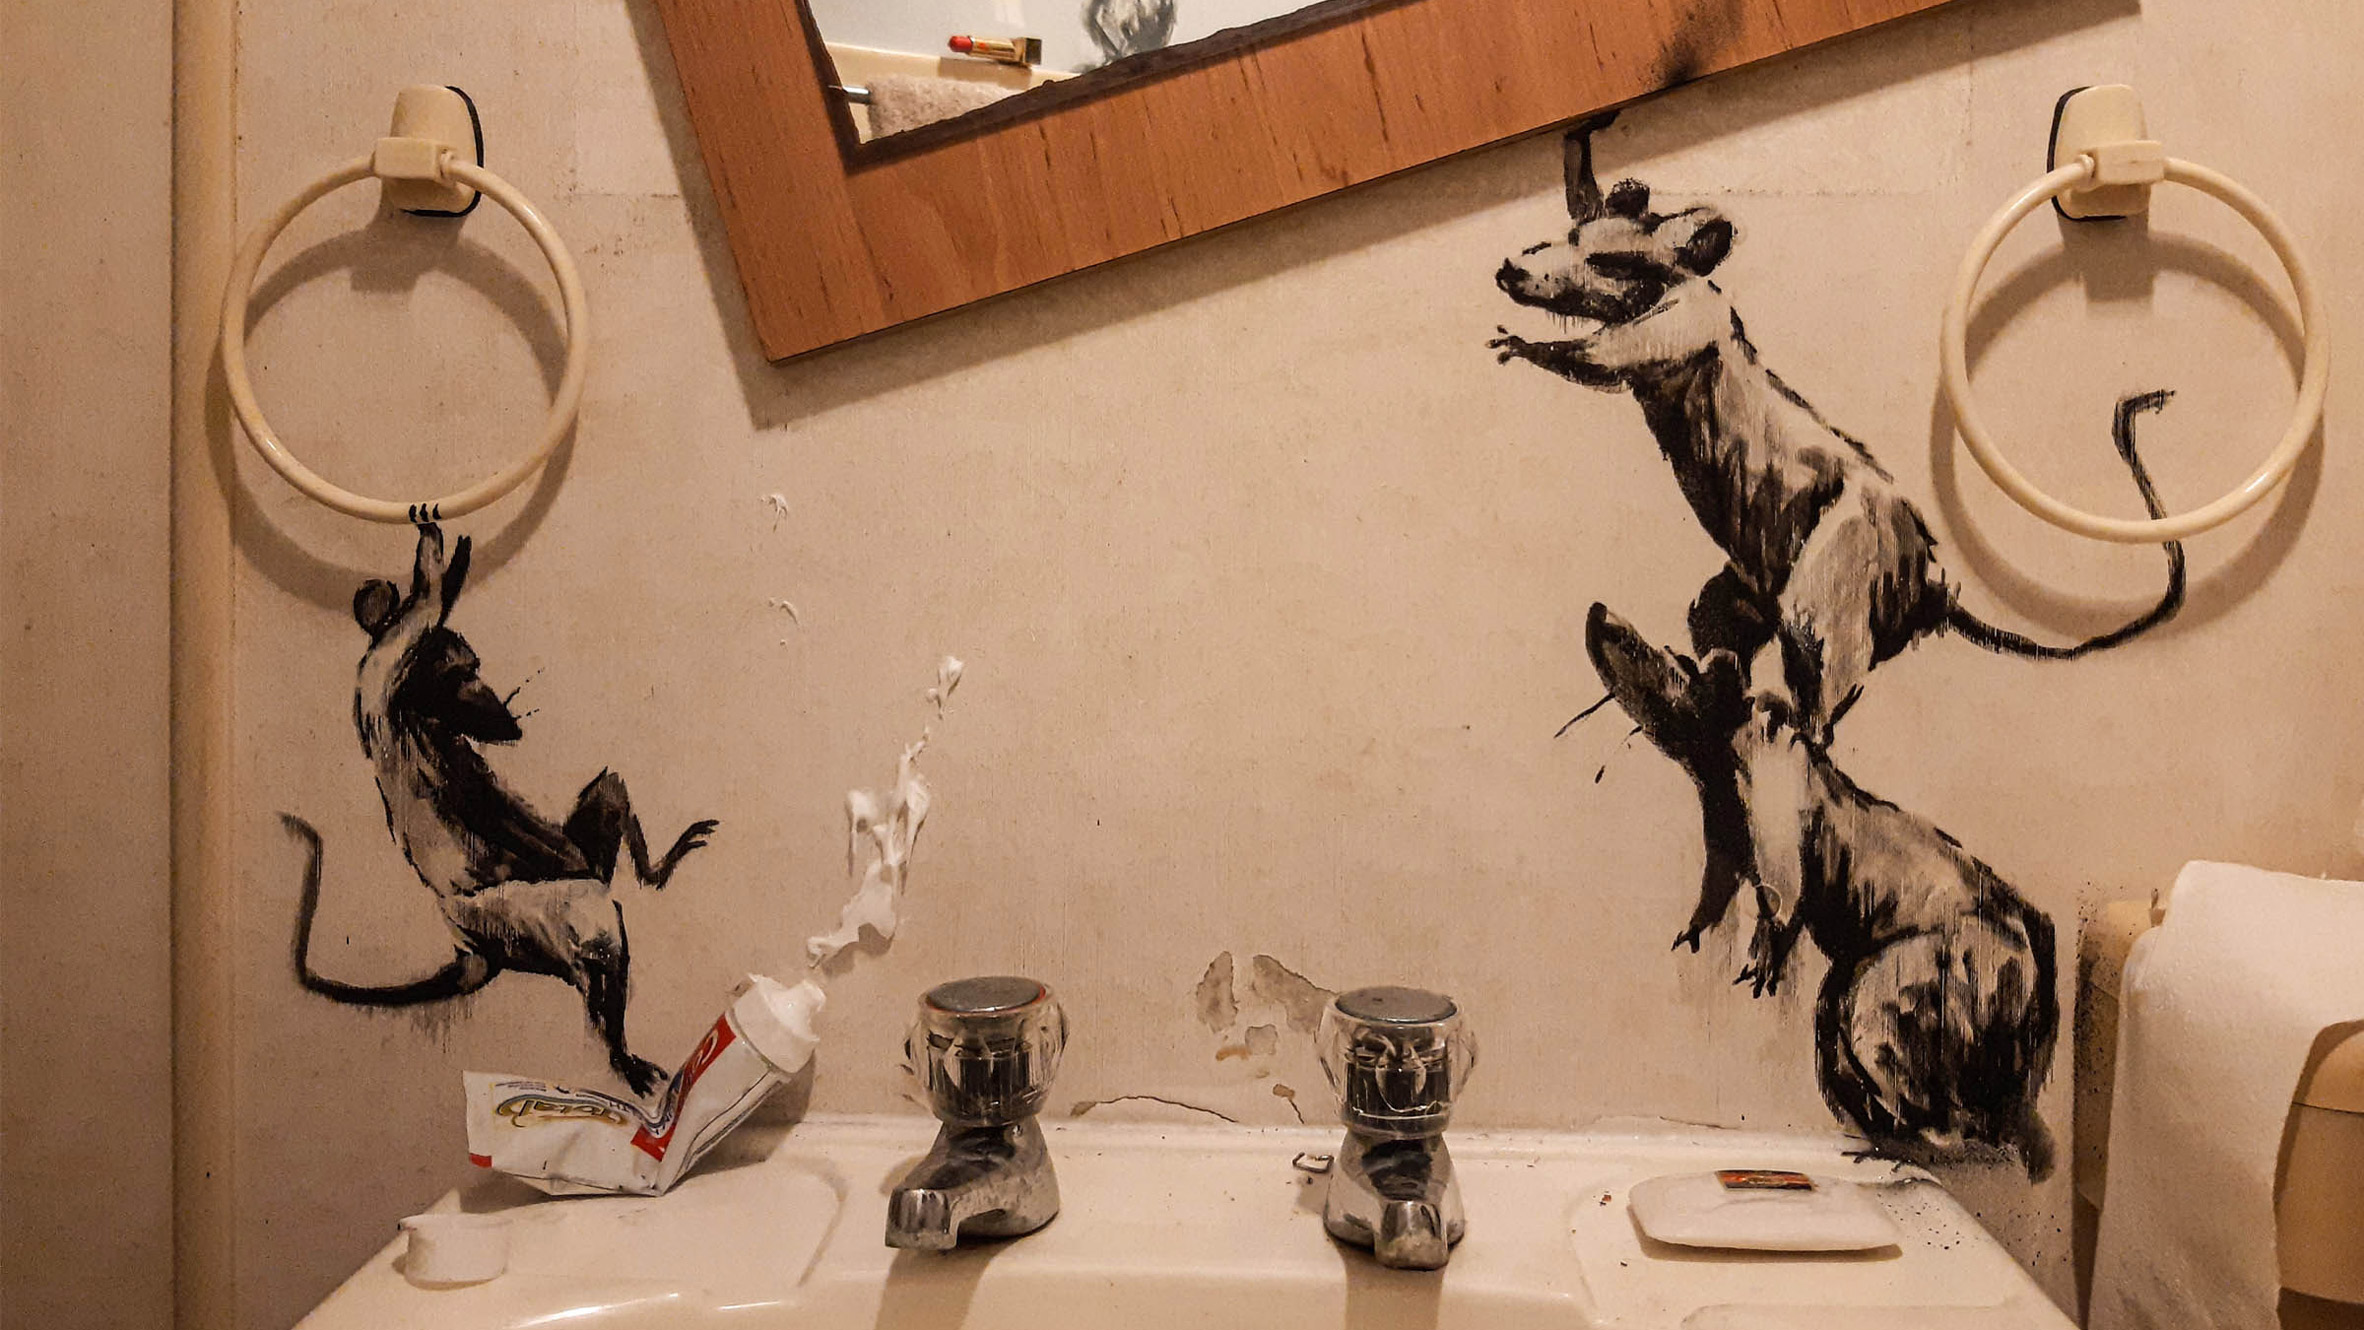 Banksy reveals rodent-themed installation inside his own bathroom